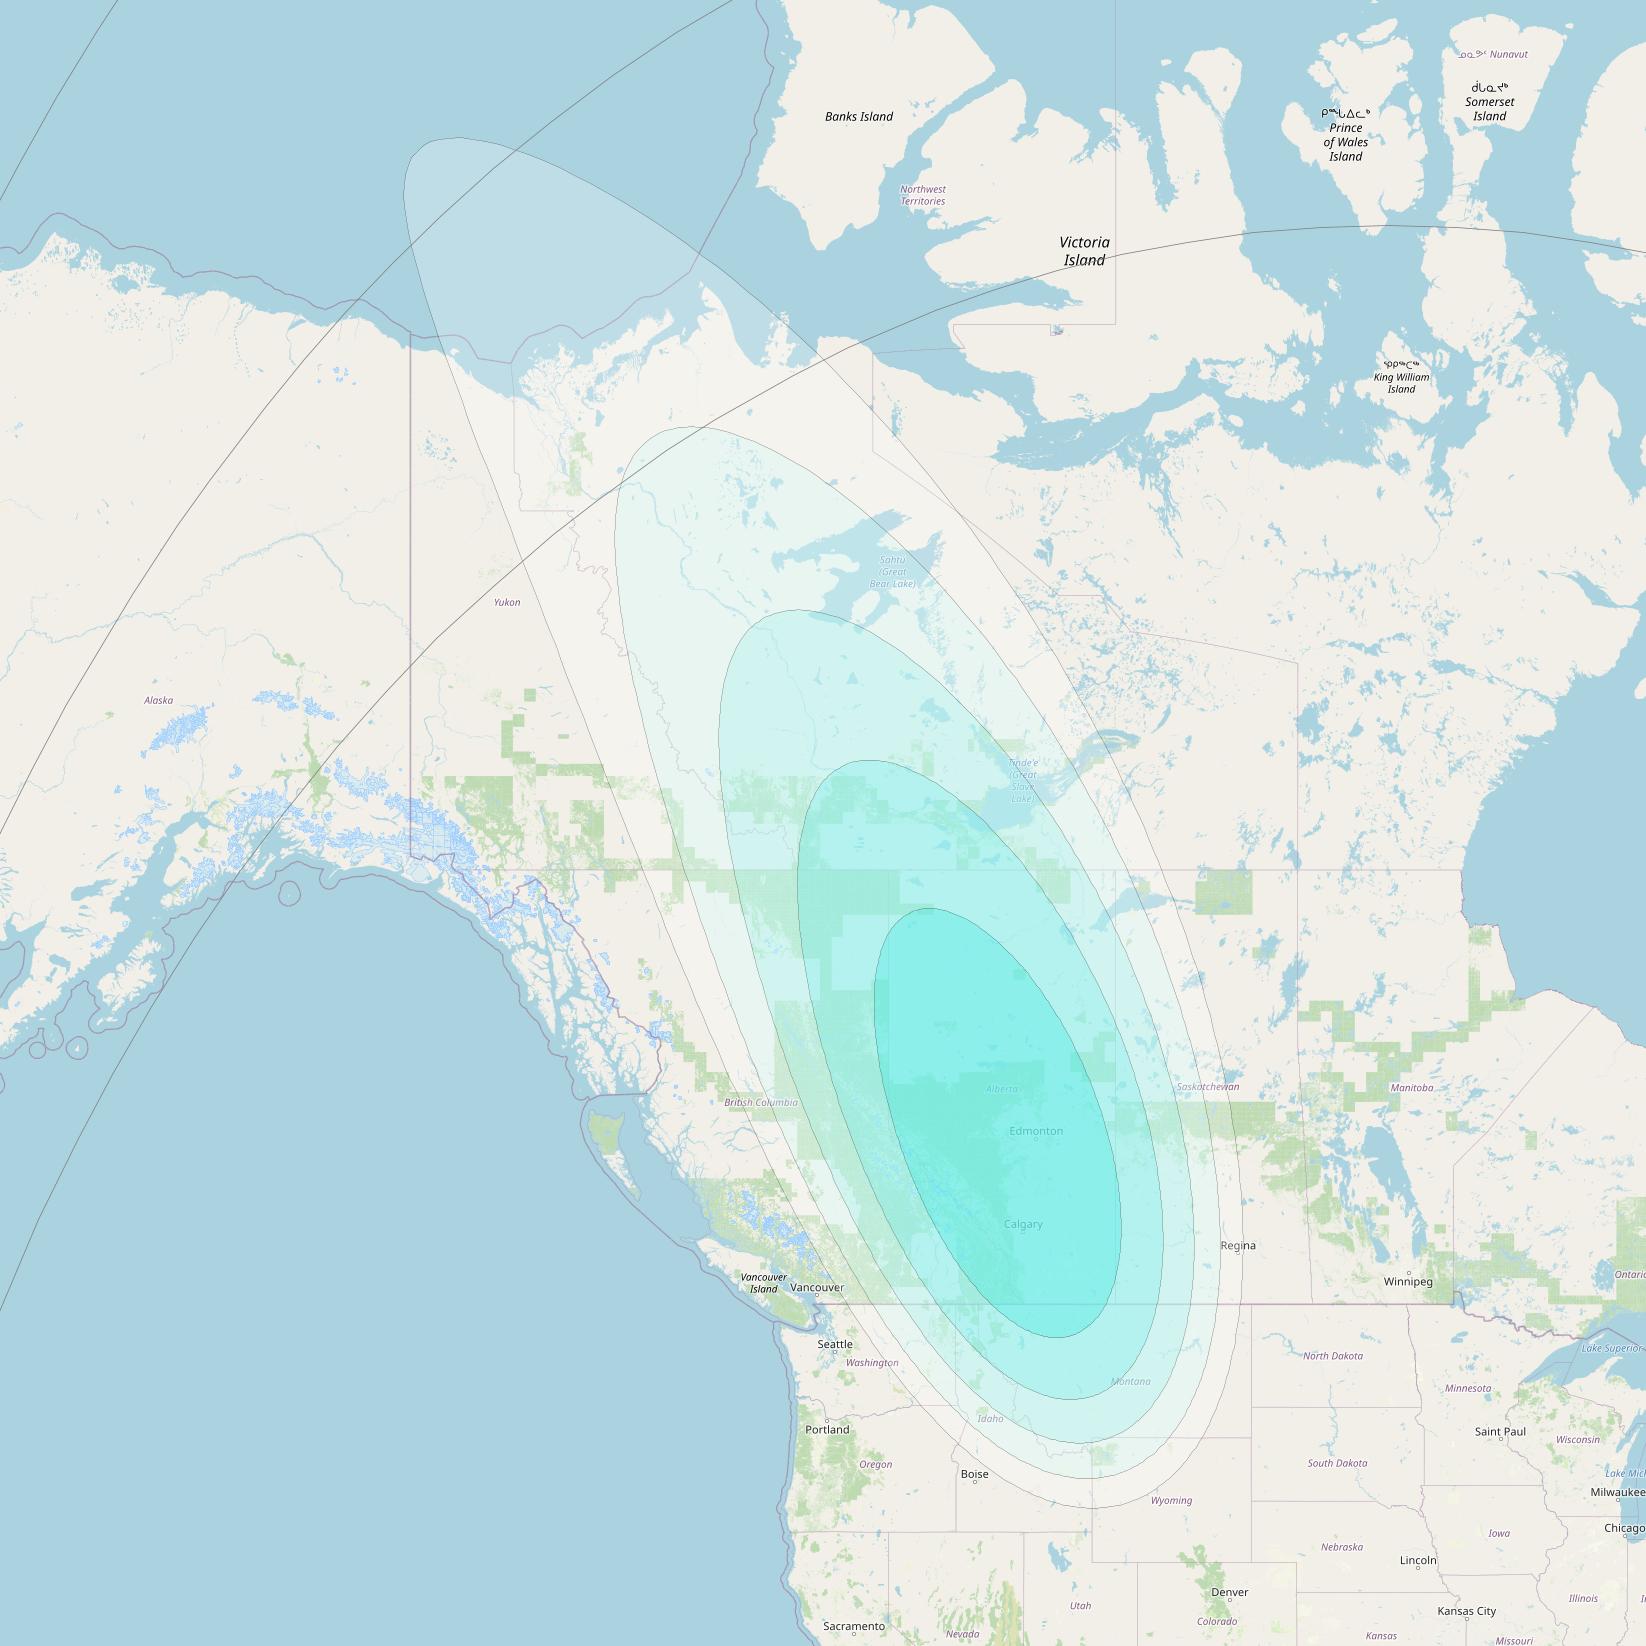 Inmarsat-4F3 at 98° W downlink L-band S081 User Spot beam coverage map